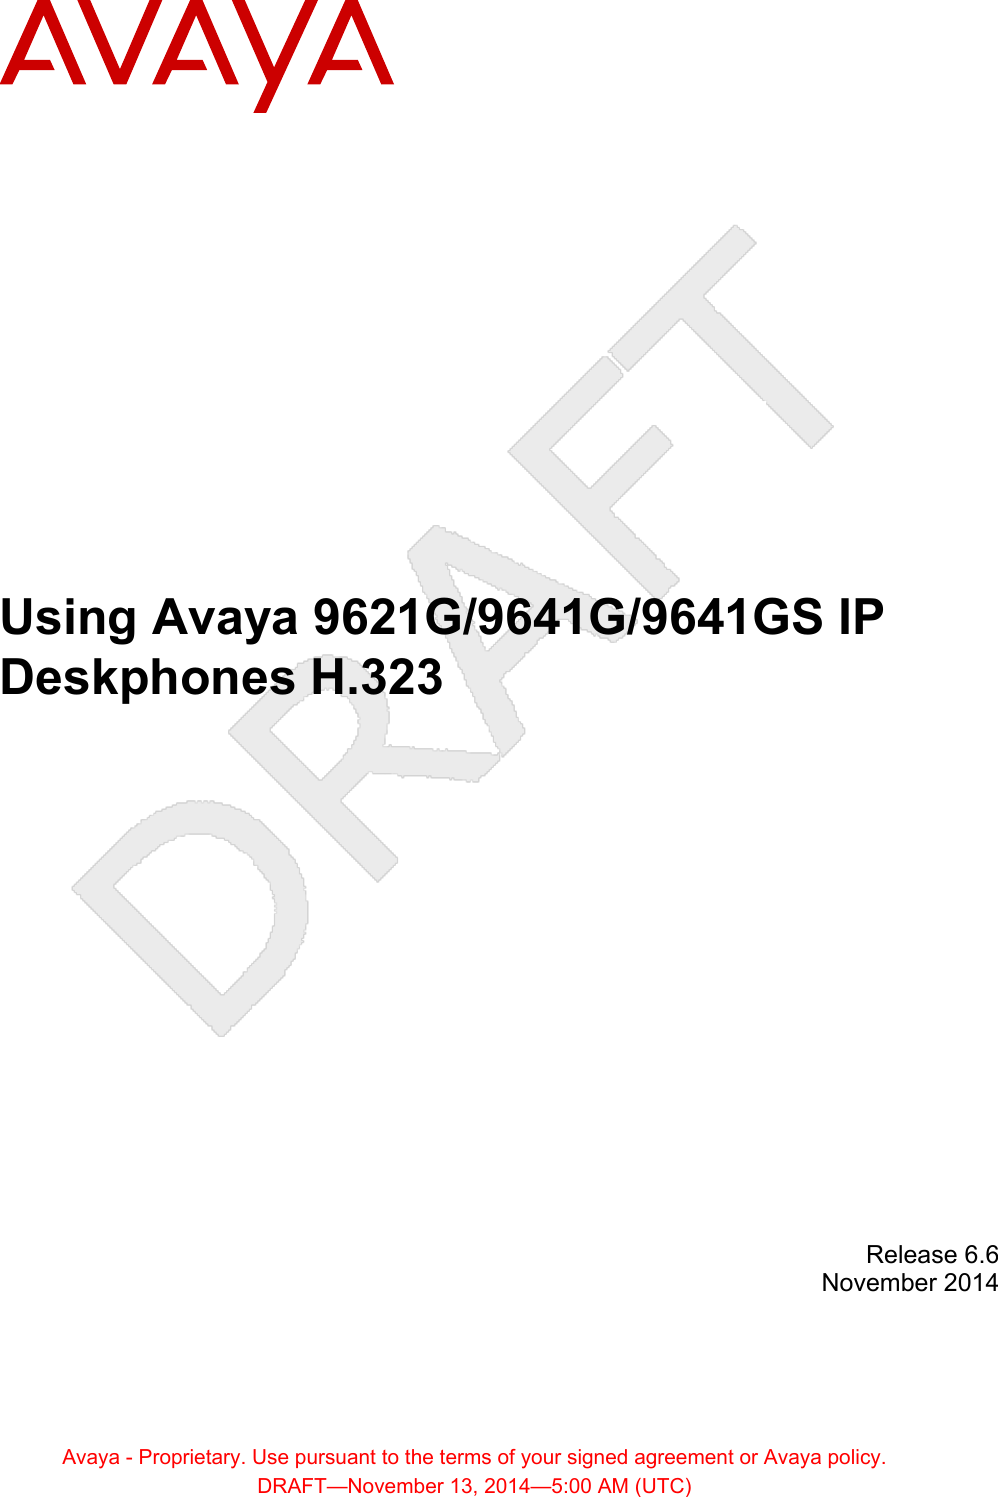 Using Avaya 9621G/9641G/9641GS IPDeskphones H.323Release 6.6November 2014Avaya - Proprietary. Use pursuant to the terms of your signed agreement or Avaya policy.DRAFT—November 13, 2014—5:00 AM (UTC)